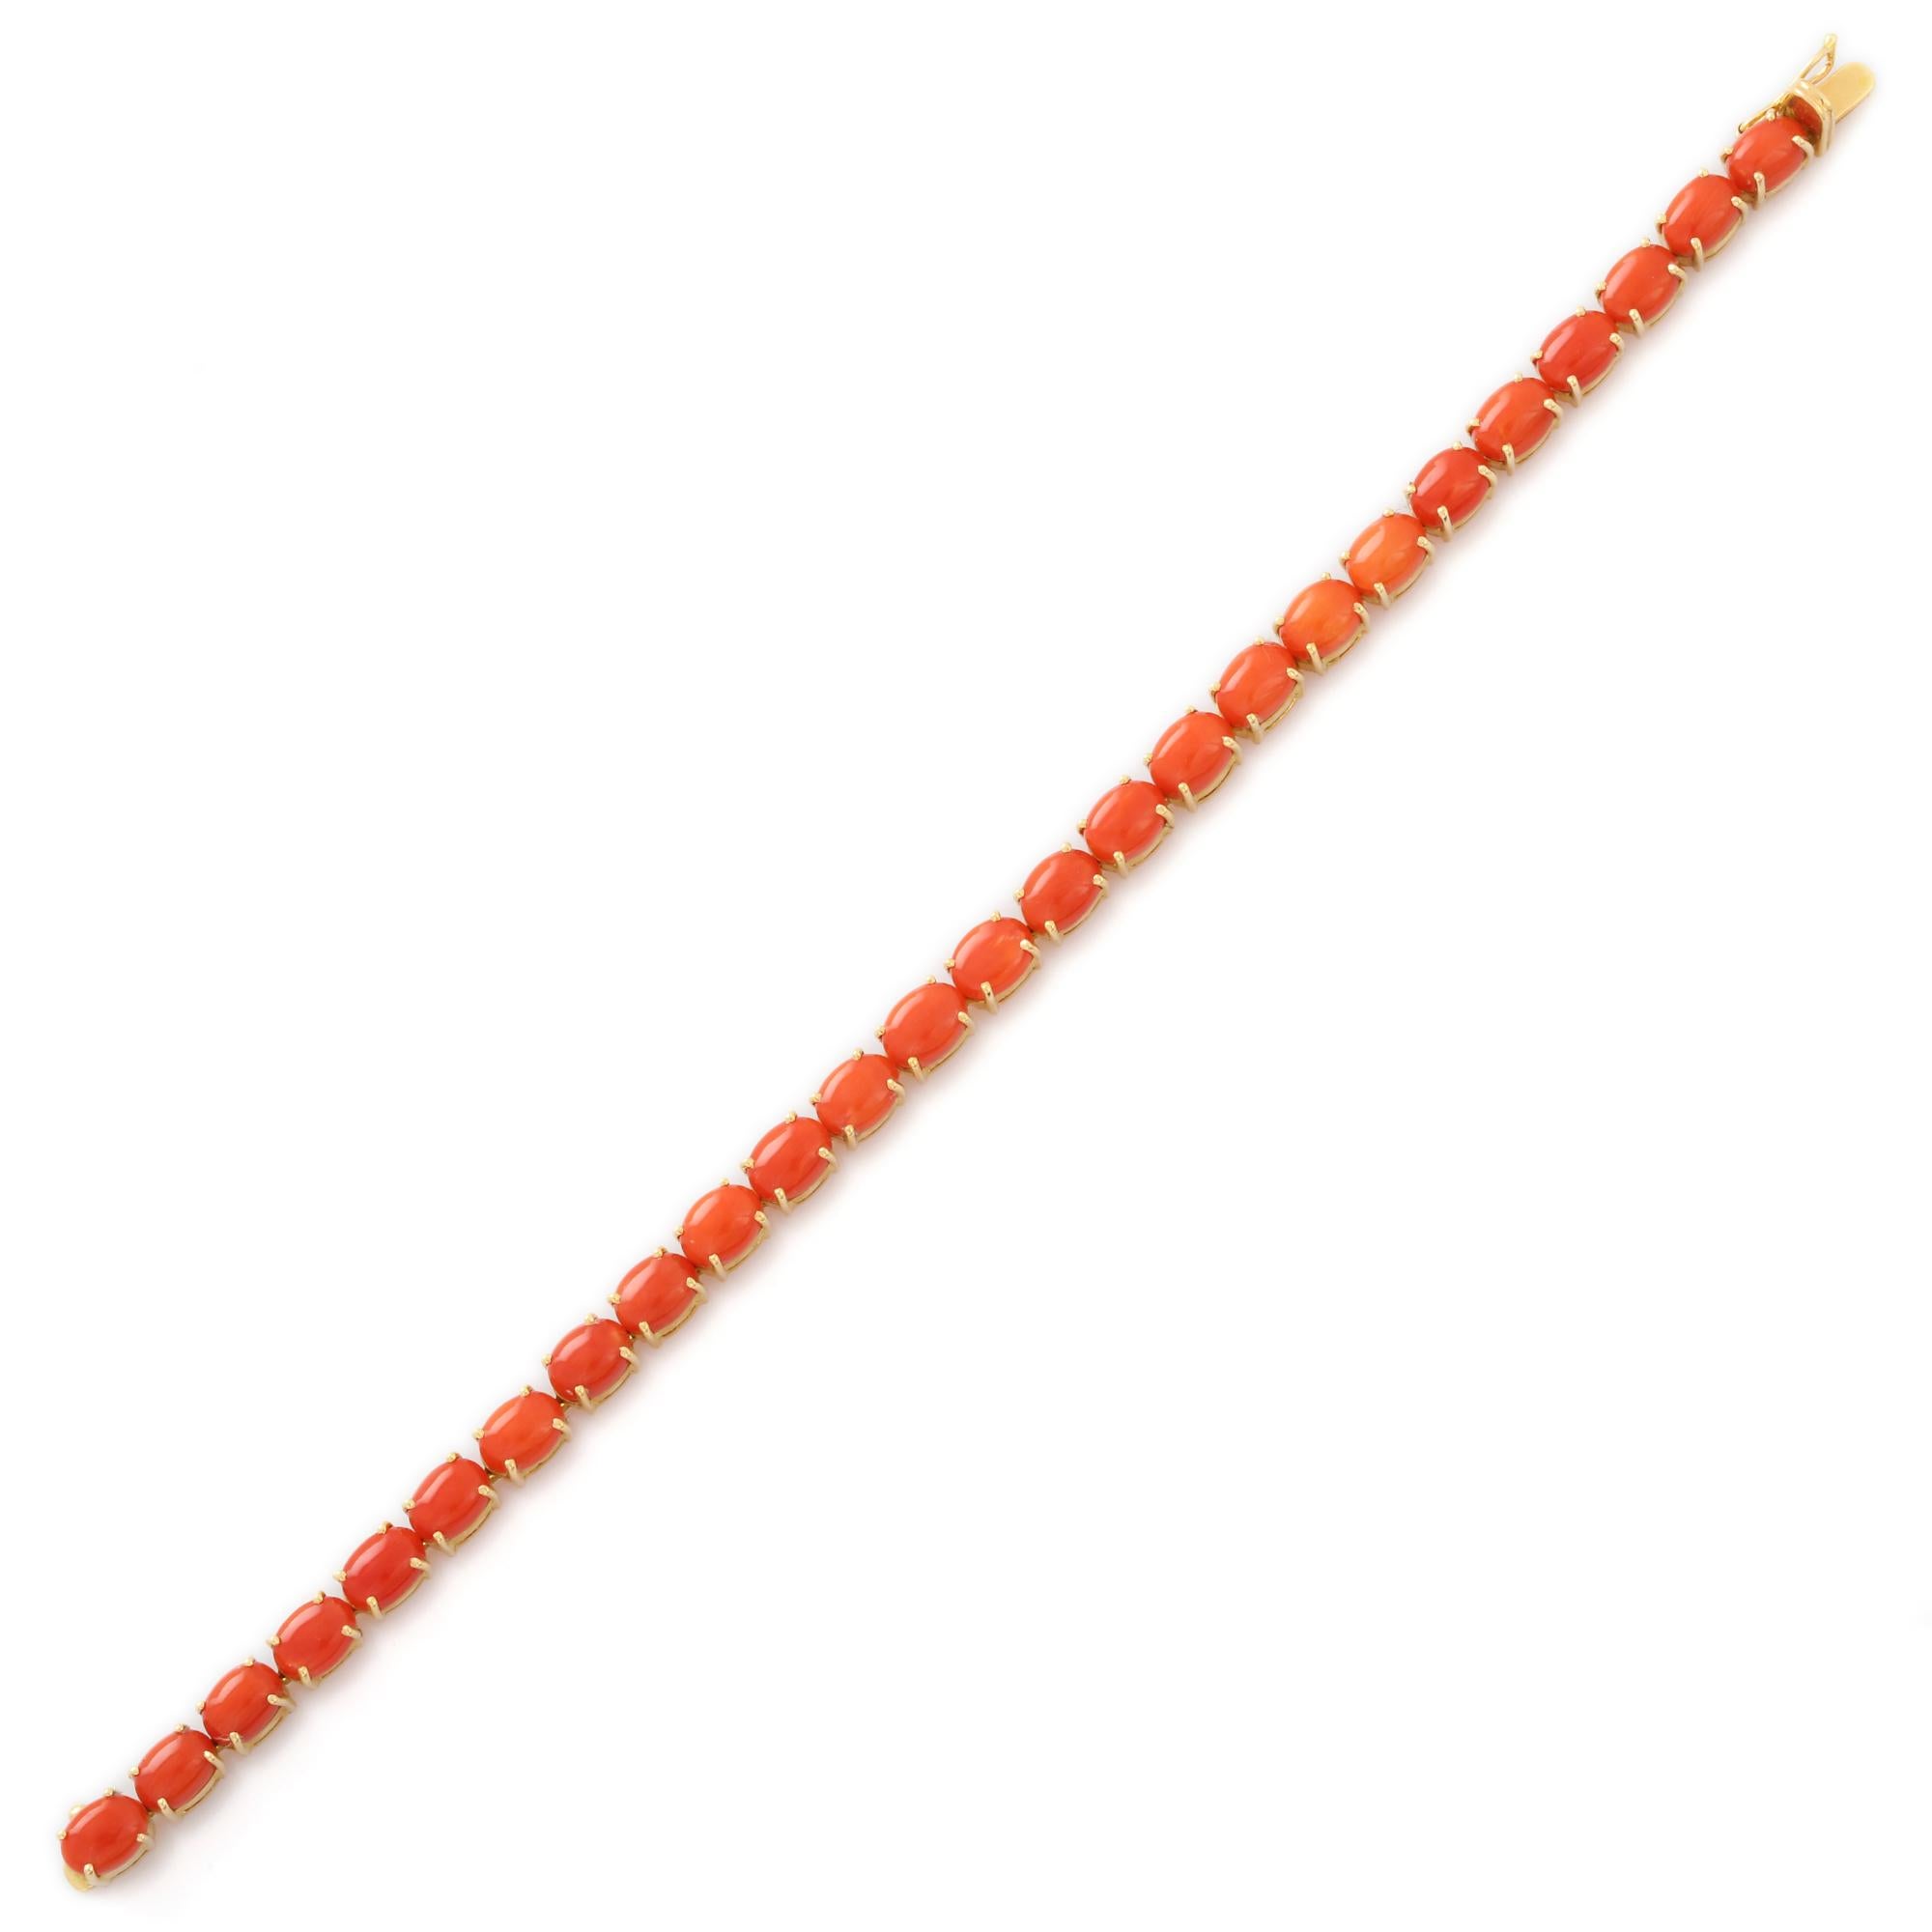 This Coral Tennis Bracelet in 18K gold showcases 26 endlessly sparkling natural coral, weighing 20.15 carats. It measures 7.5 inches long in length. 
Coral is a symbol of good luck and fortune.
Designed with perfect oval cut coral set in repetition